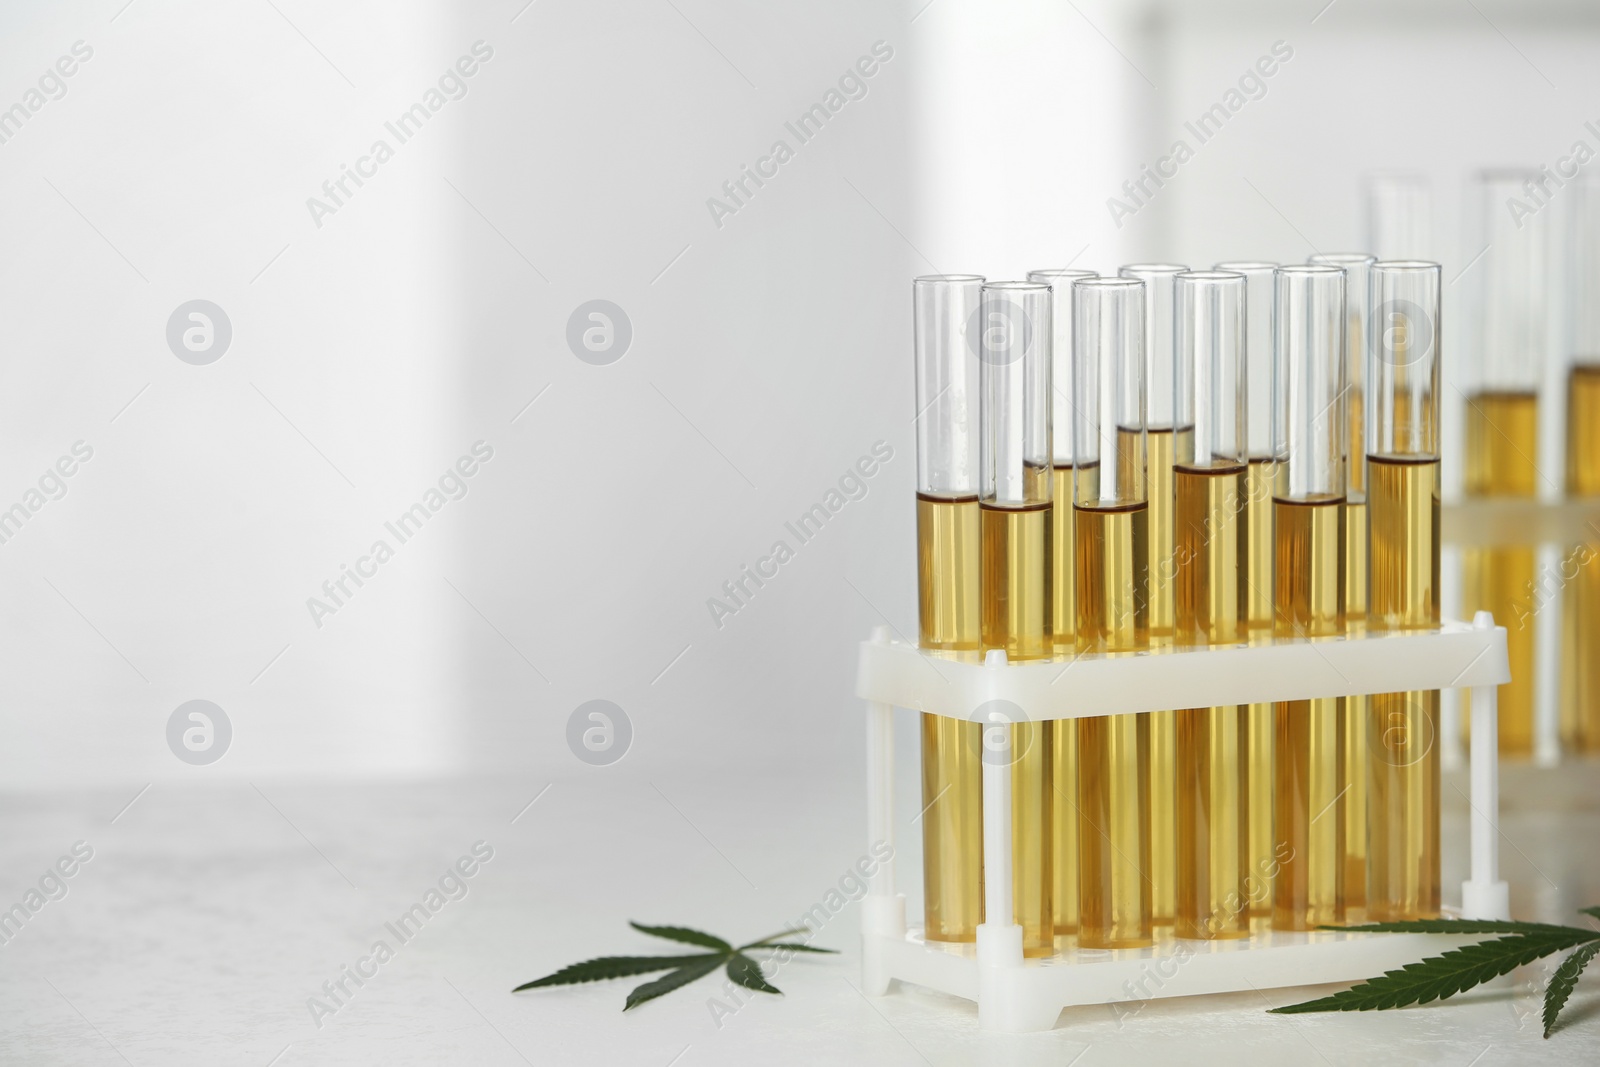 Photo of Test tubes with urine samples and hemp leaves on table. Space for text